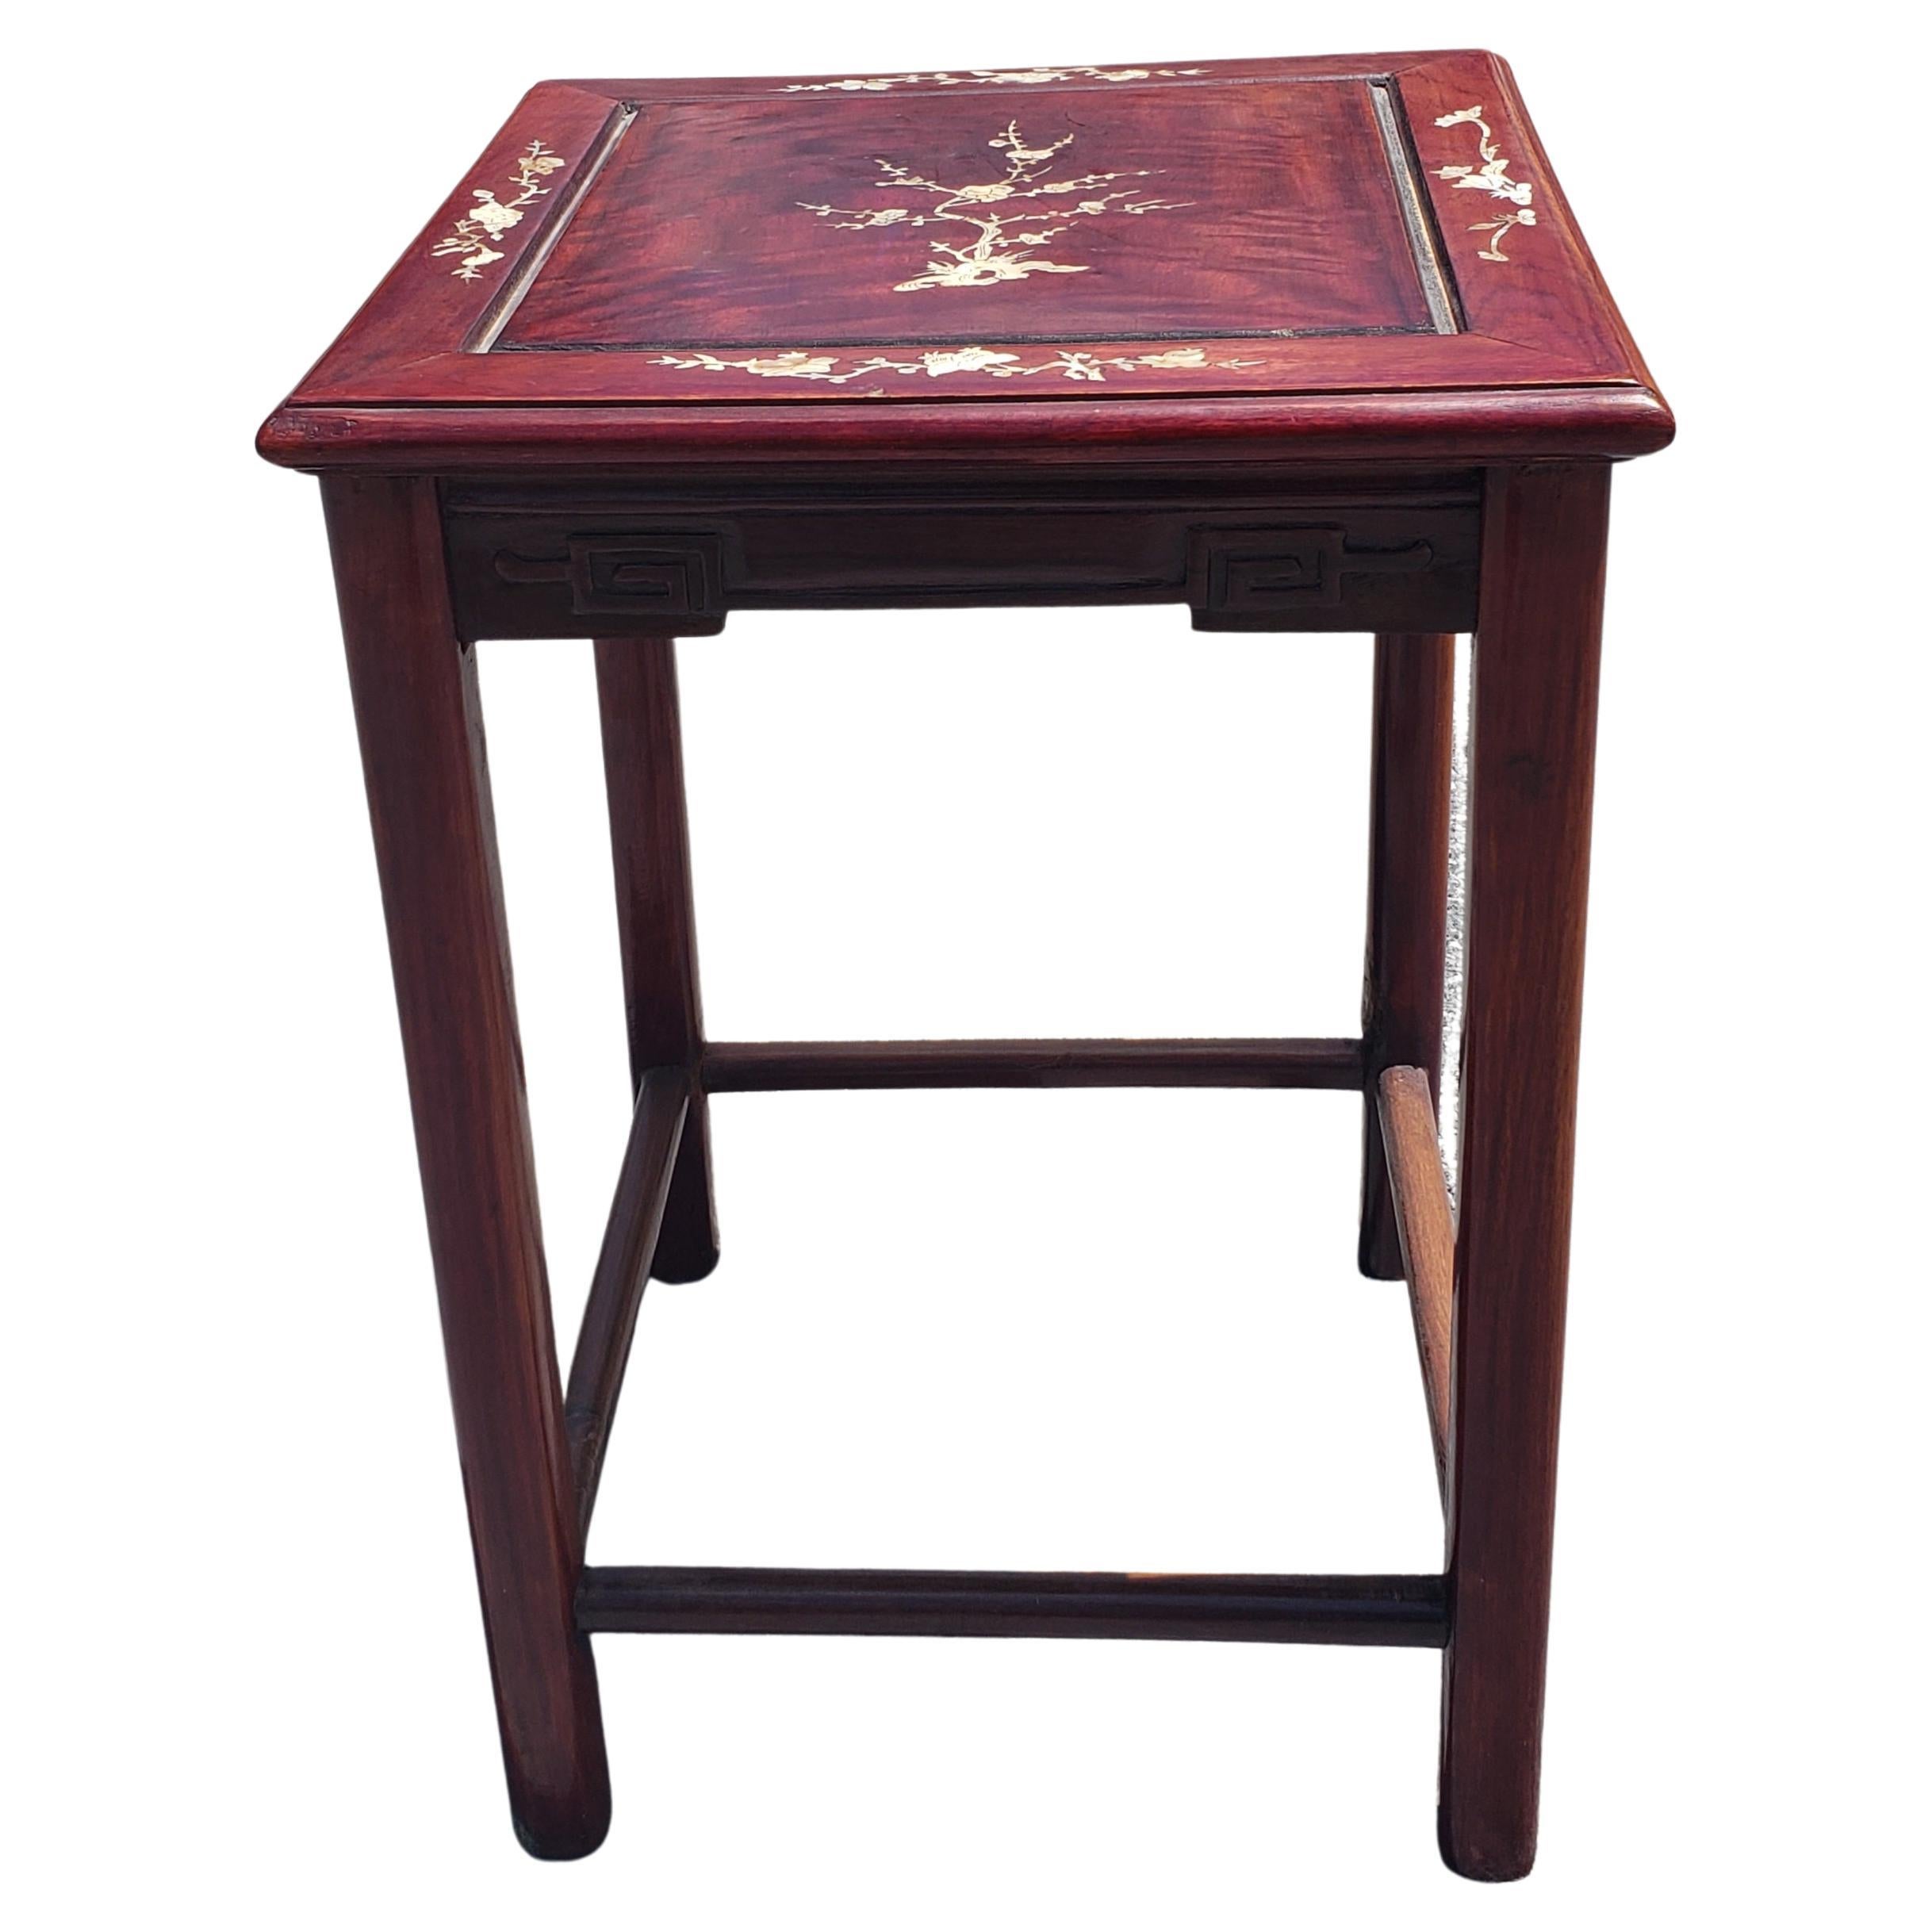 Rosewood Mother-of-Pearl Inlay Square Side Table In Good Condition For Sale In Germantown, MD